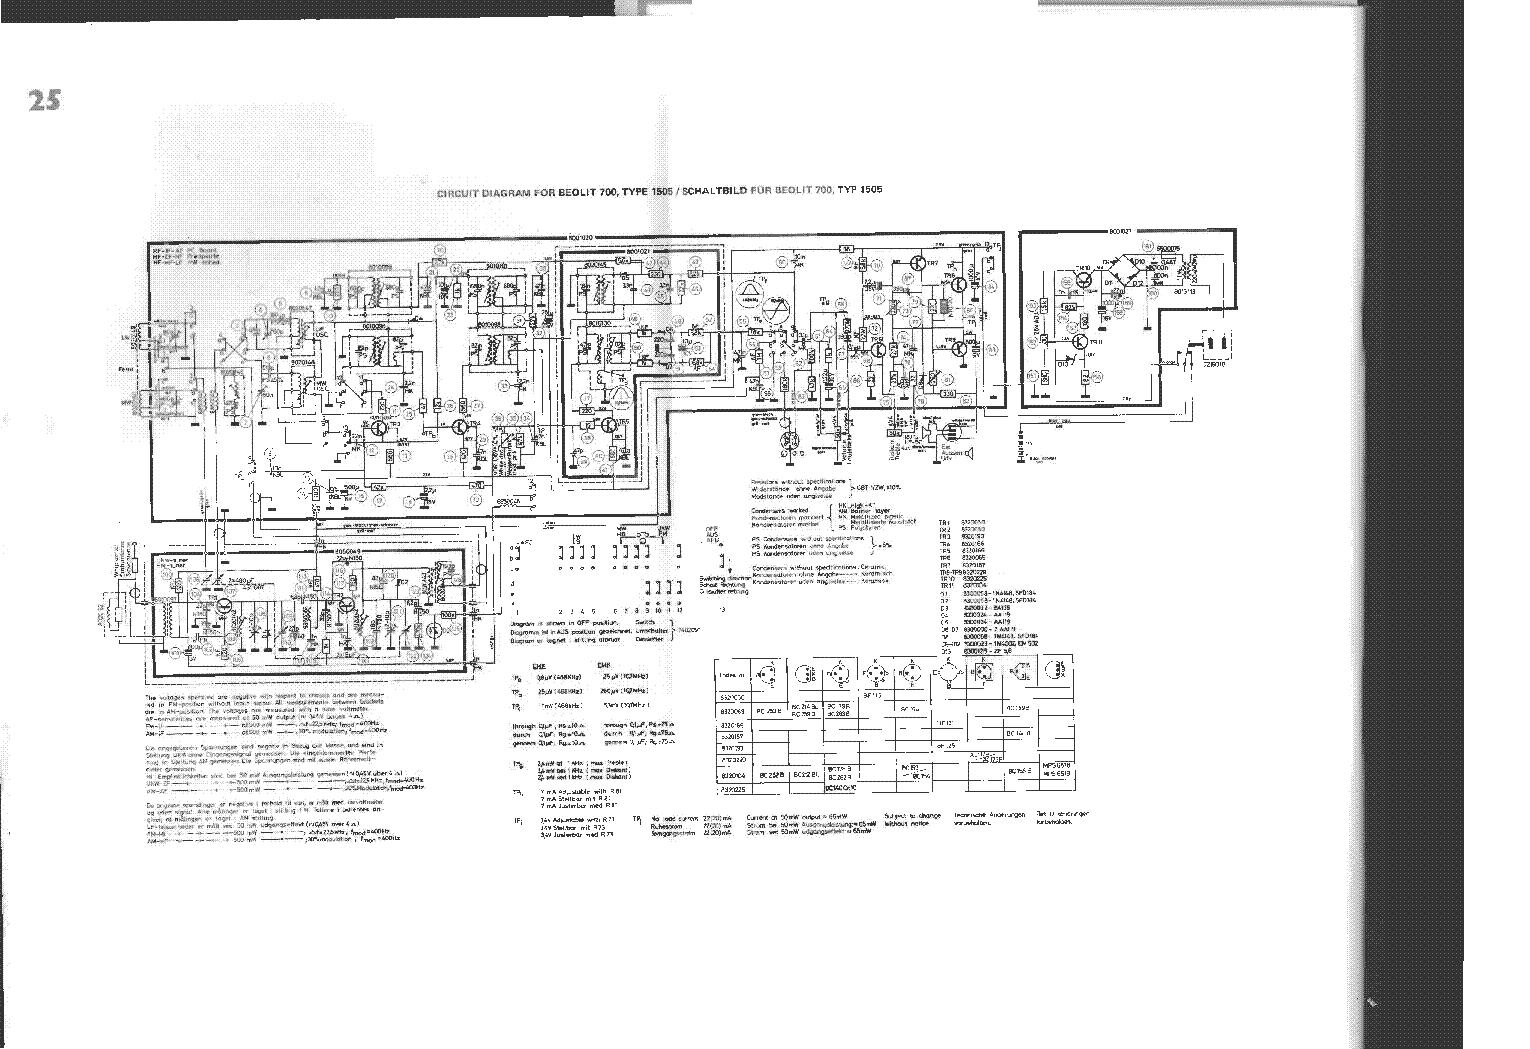 BANG OLUFSEN BEOLIT 700 TYPE 1505 BEOLIT 707 TYPE 1515 MAINS SWITCH SM service manual (2nd page)